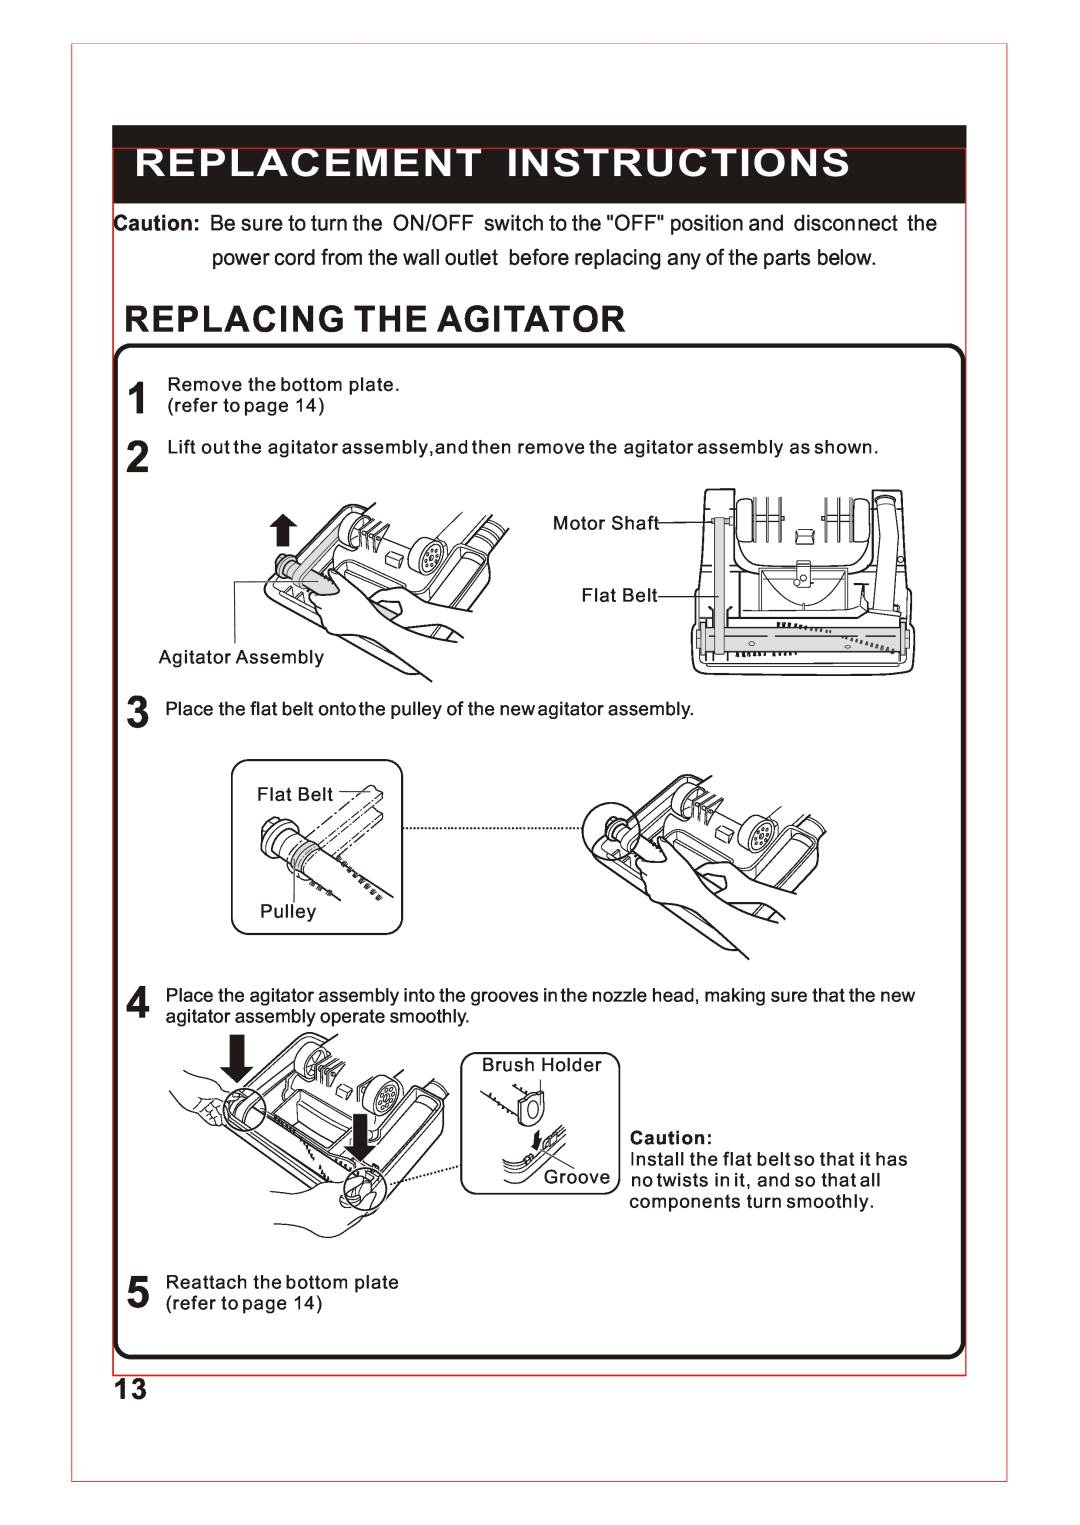 Sanyo SC-X90 instruction manual Replacing The Agitator, Replacement Instructions 